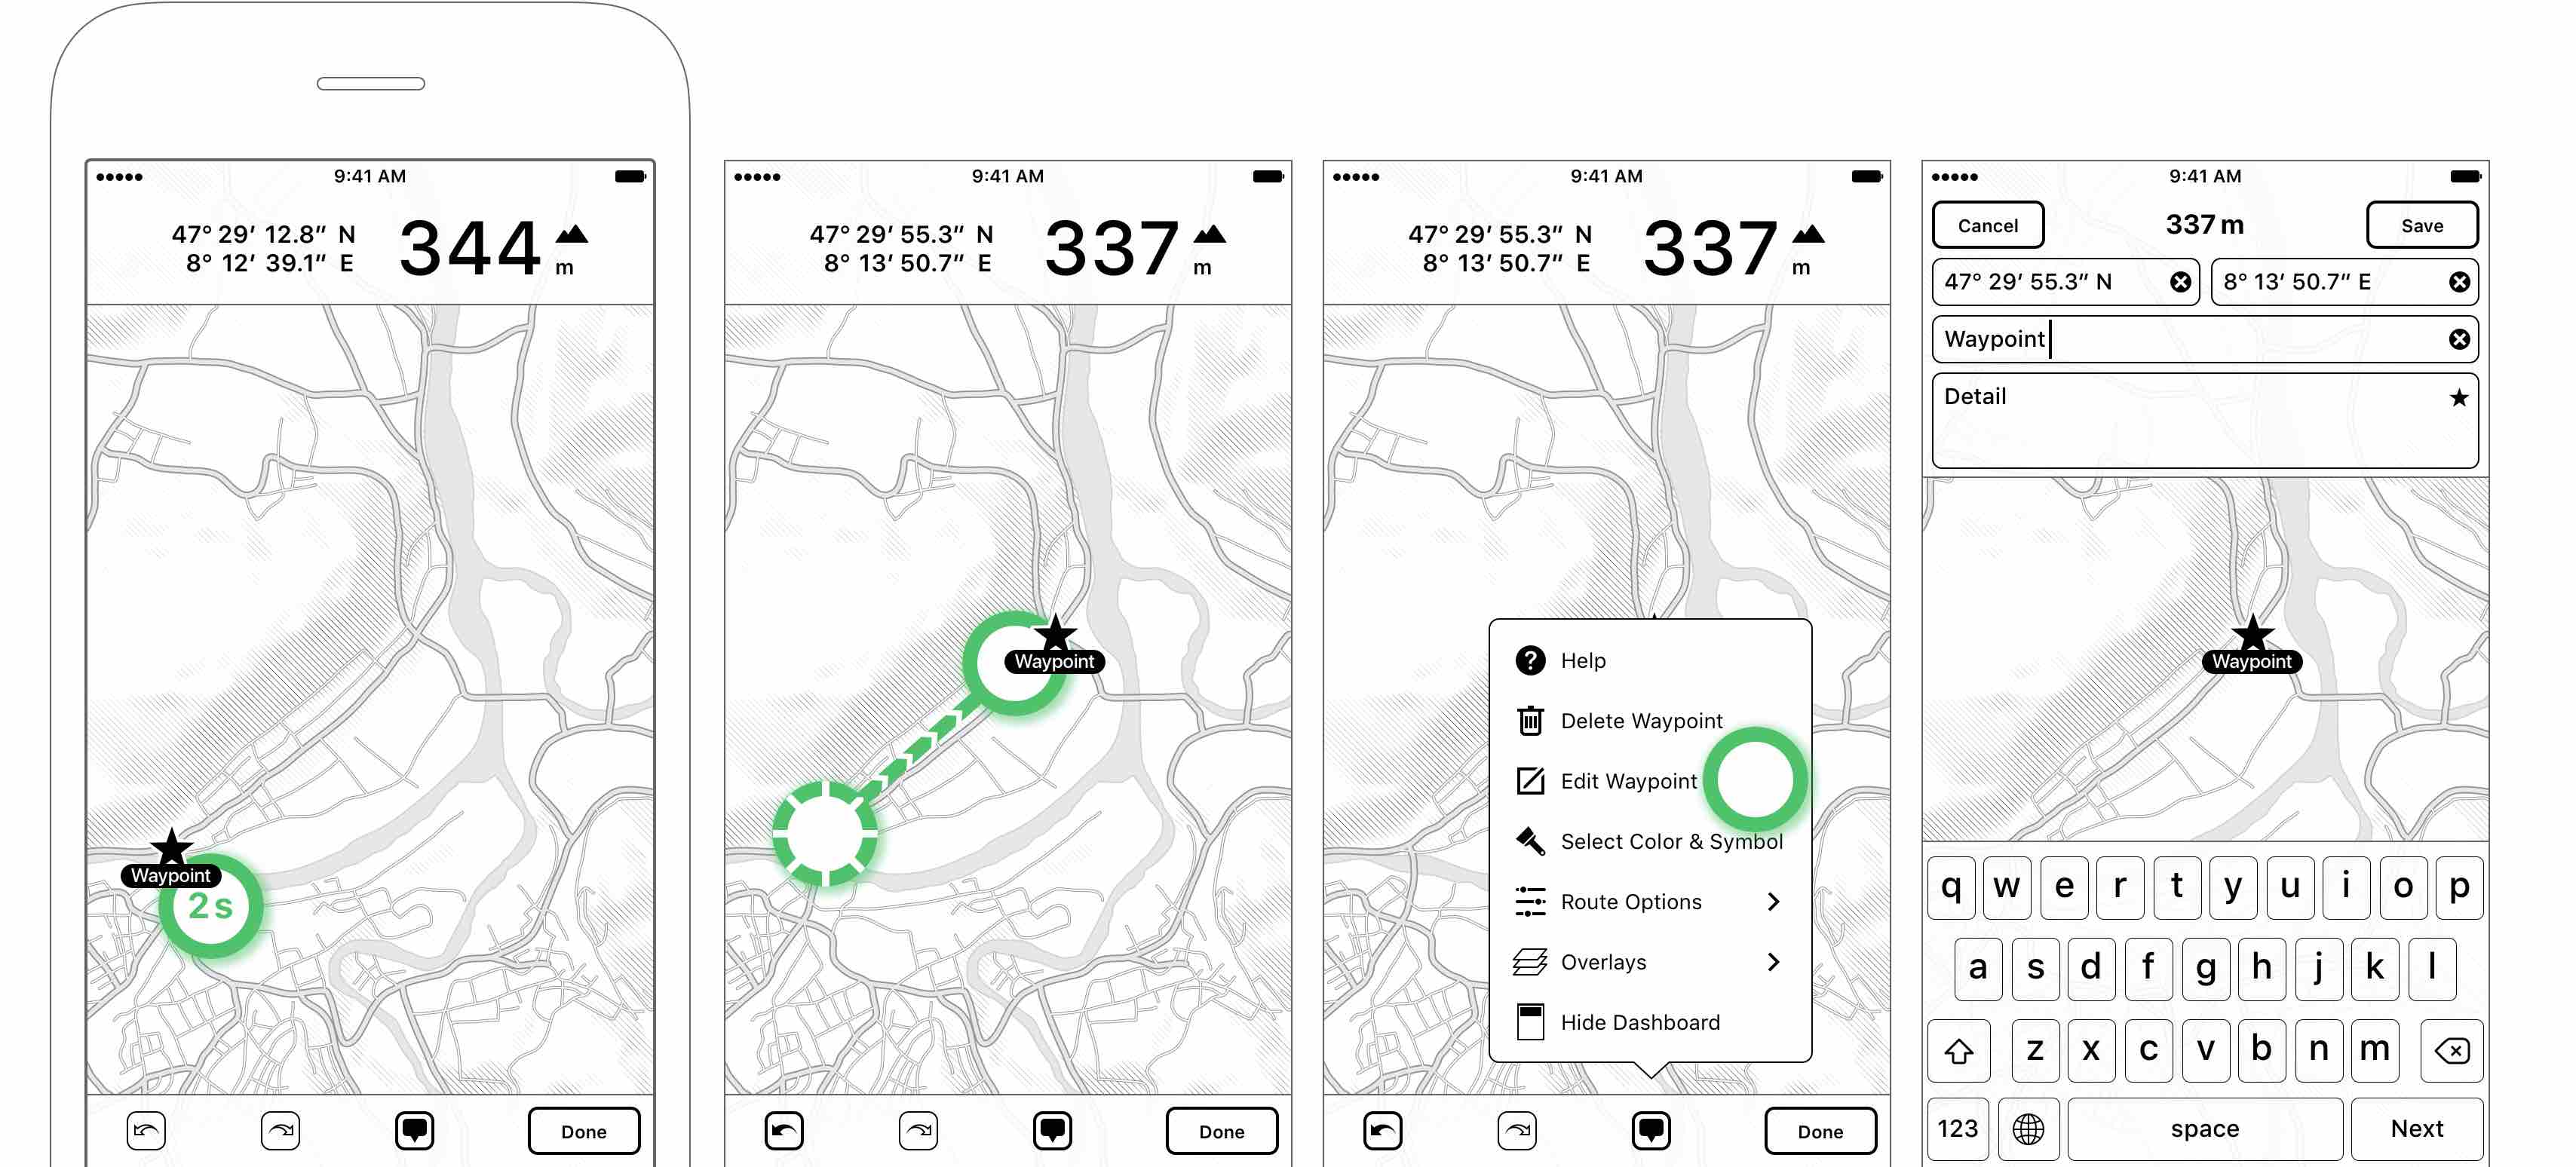 Figure 2.17: Adding a new waypoint by tapping > 2 sec — Move the waypoint by dragging it over the map — Modifying the name or detail of the waypoint — Entering the exact coordinates or title and detail information